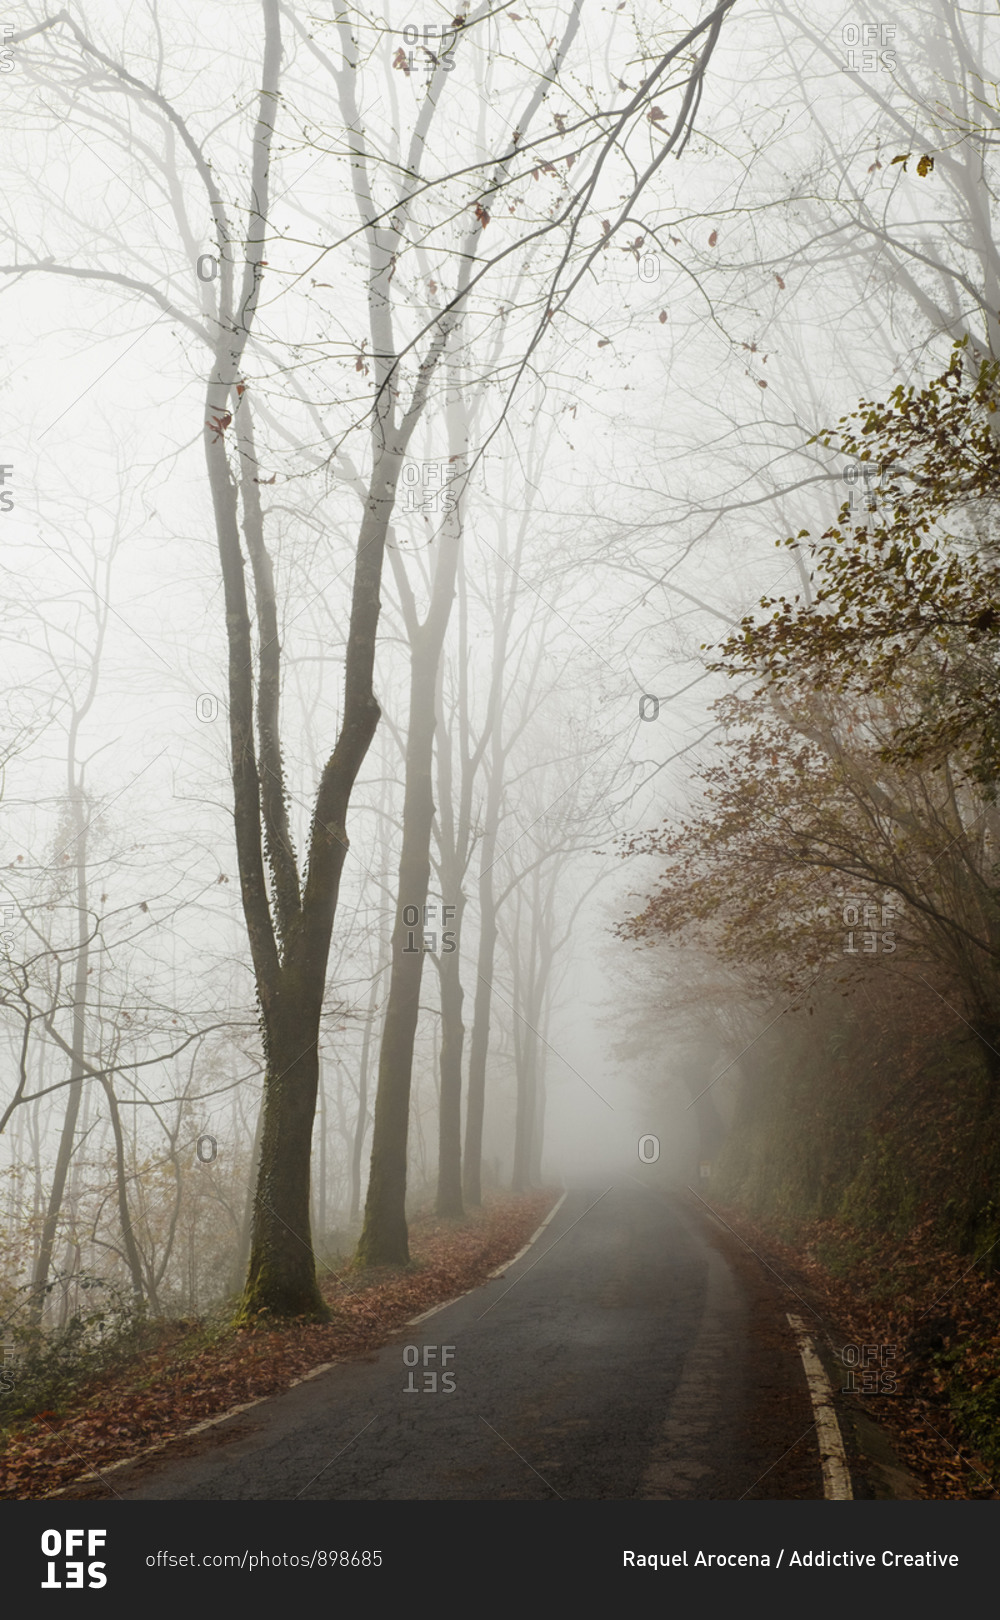 Empty narrow asphalt road leading through foggy autumn forest with bare trees at roadside in gloomy day